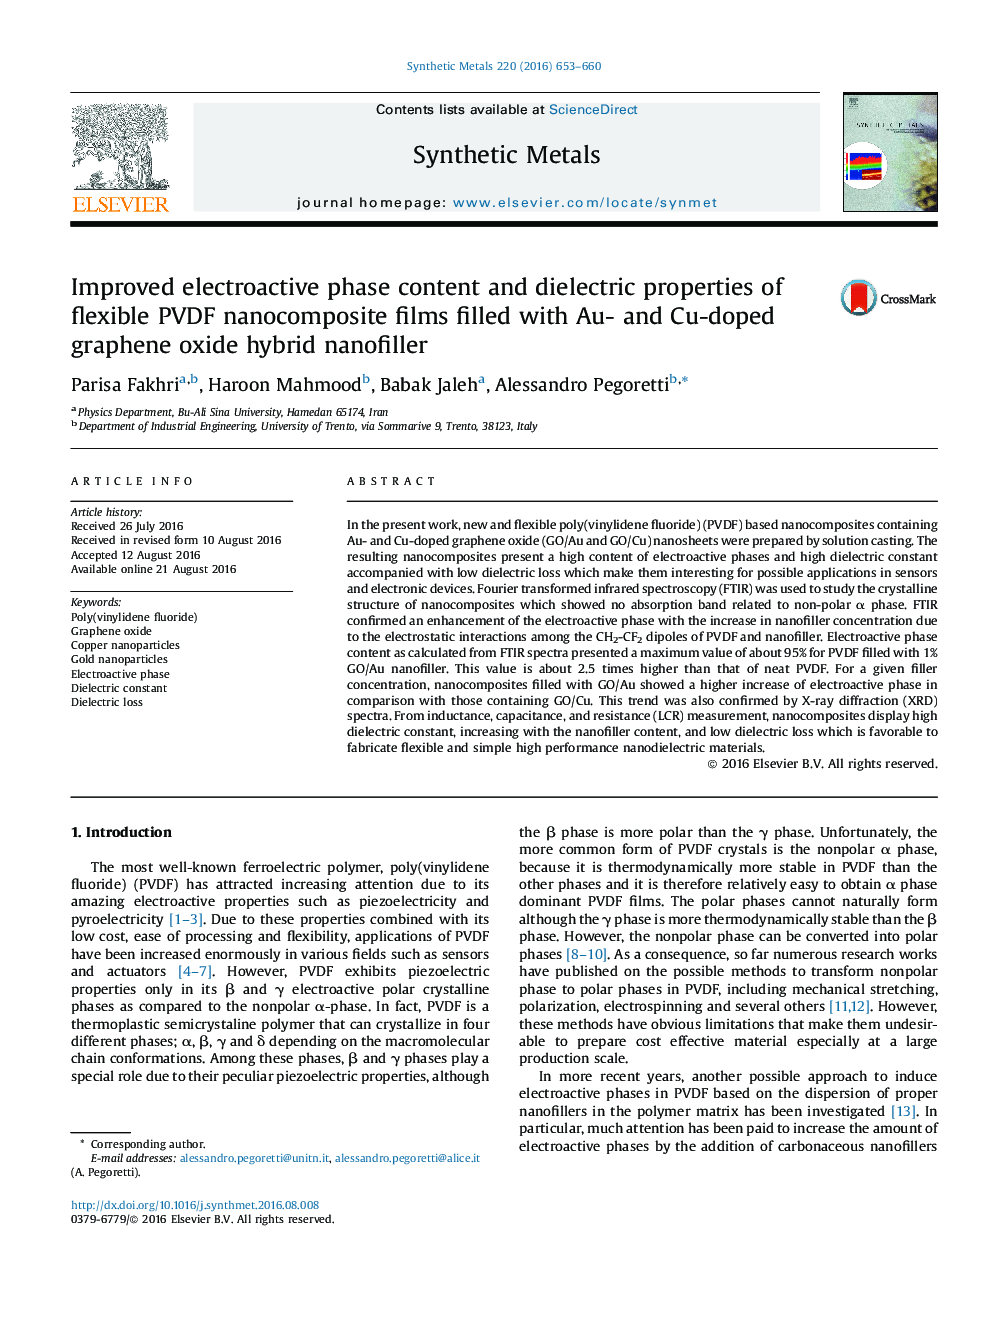 Improved electroactive phase content and dielectric properties of flexible PVDF nanocomposite films filled with Au- and Cu-doped graphene oxide hybrid nanofiller